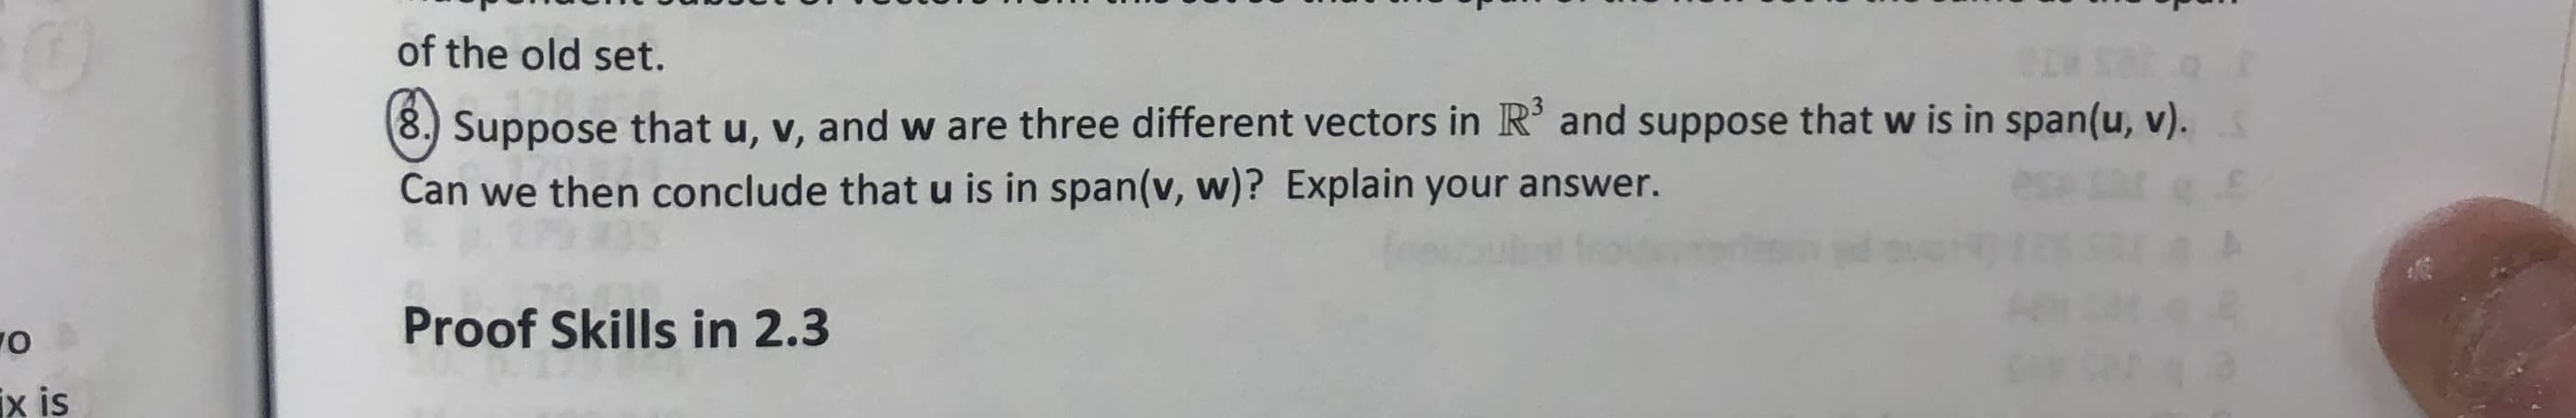 of the old set.
8.) Suppose that u, v, and w are three different vectors in R and suppose that w is in span(u, v).
Can we then conclude that u is in span(v, w)? Explain your answer.
Proof Skills in 2.3
O
ix is
